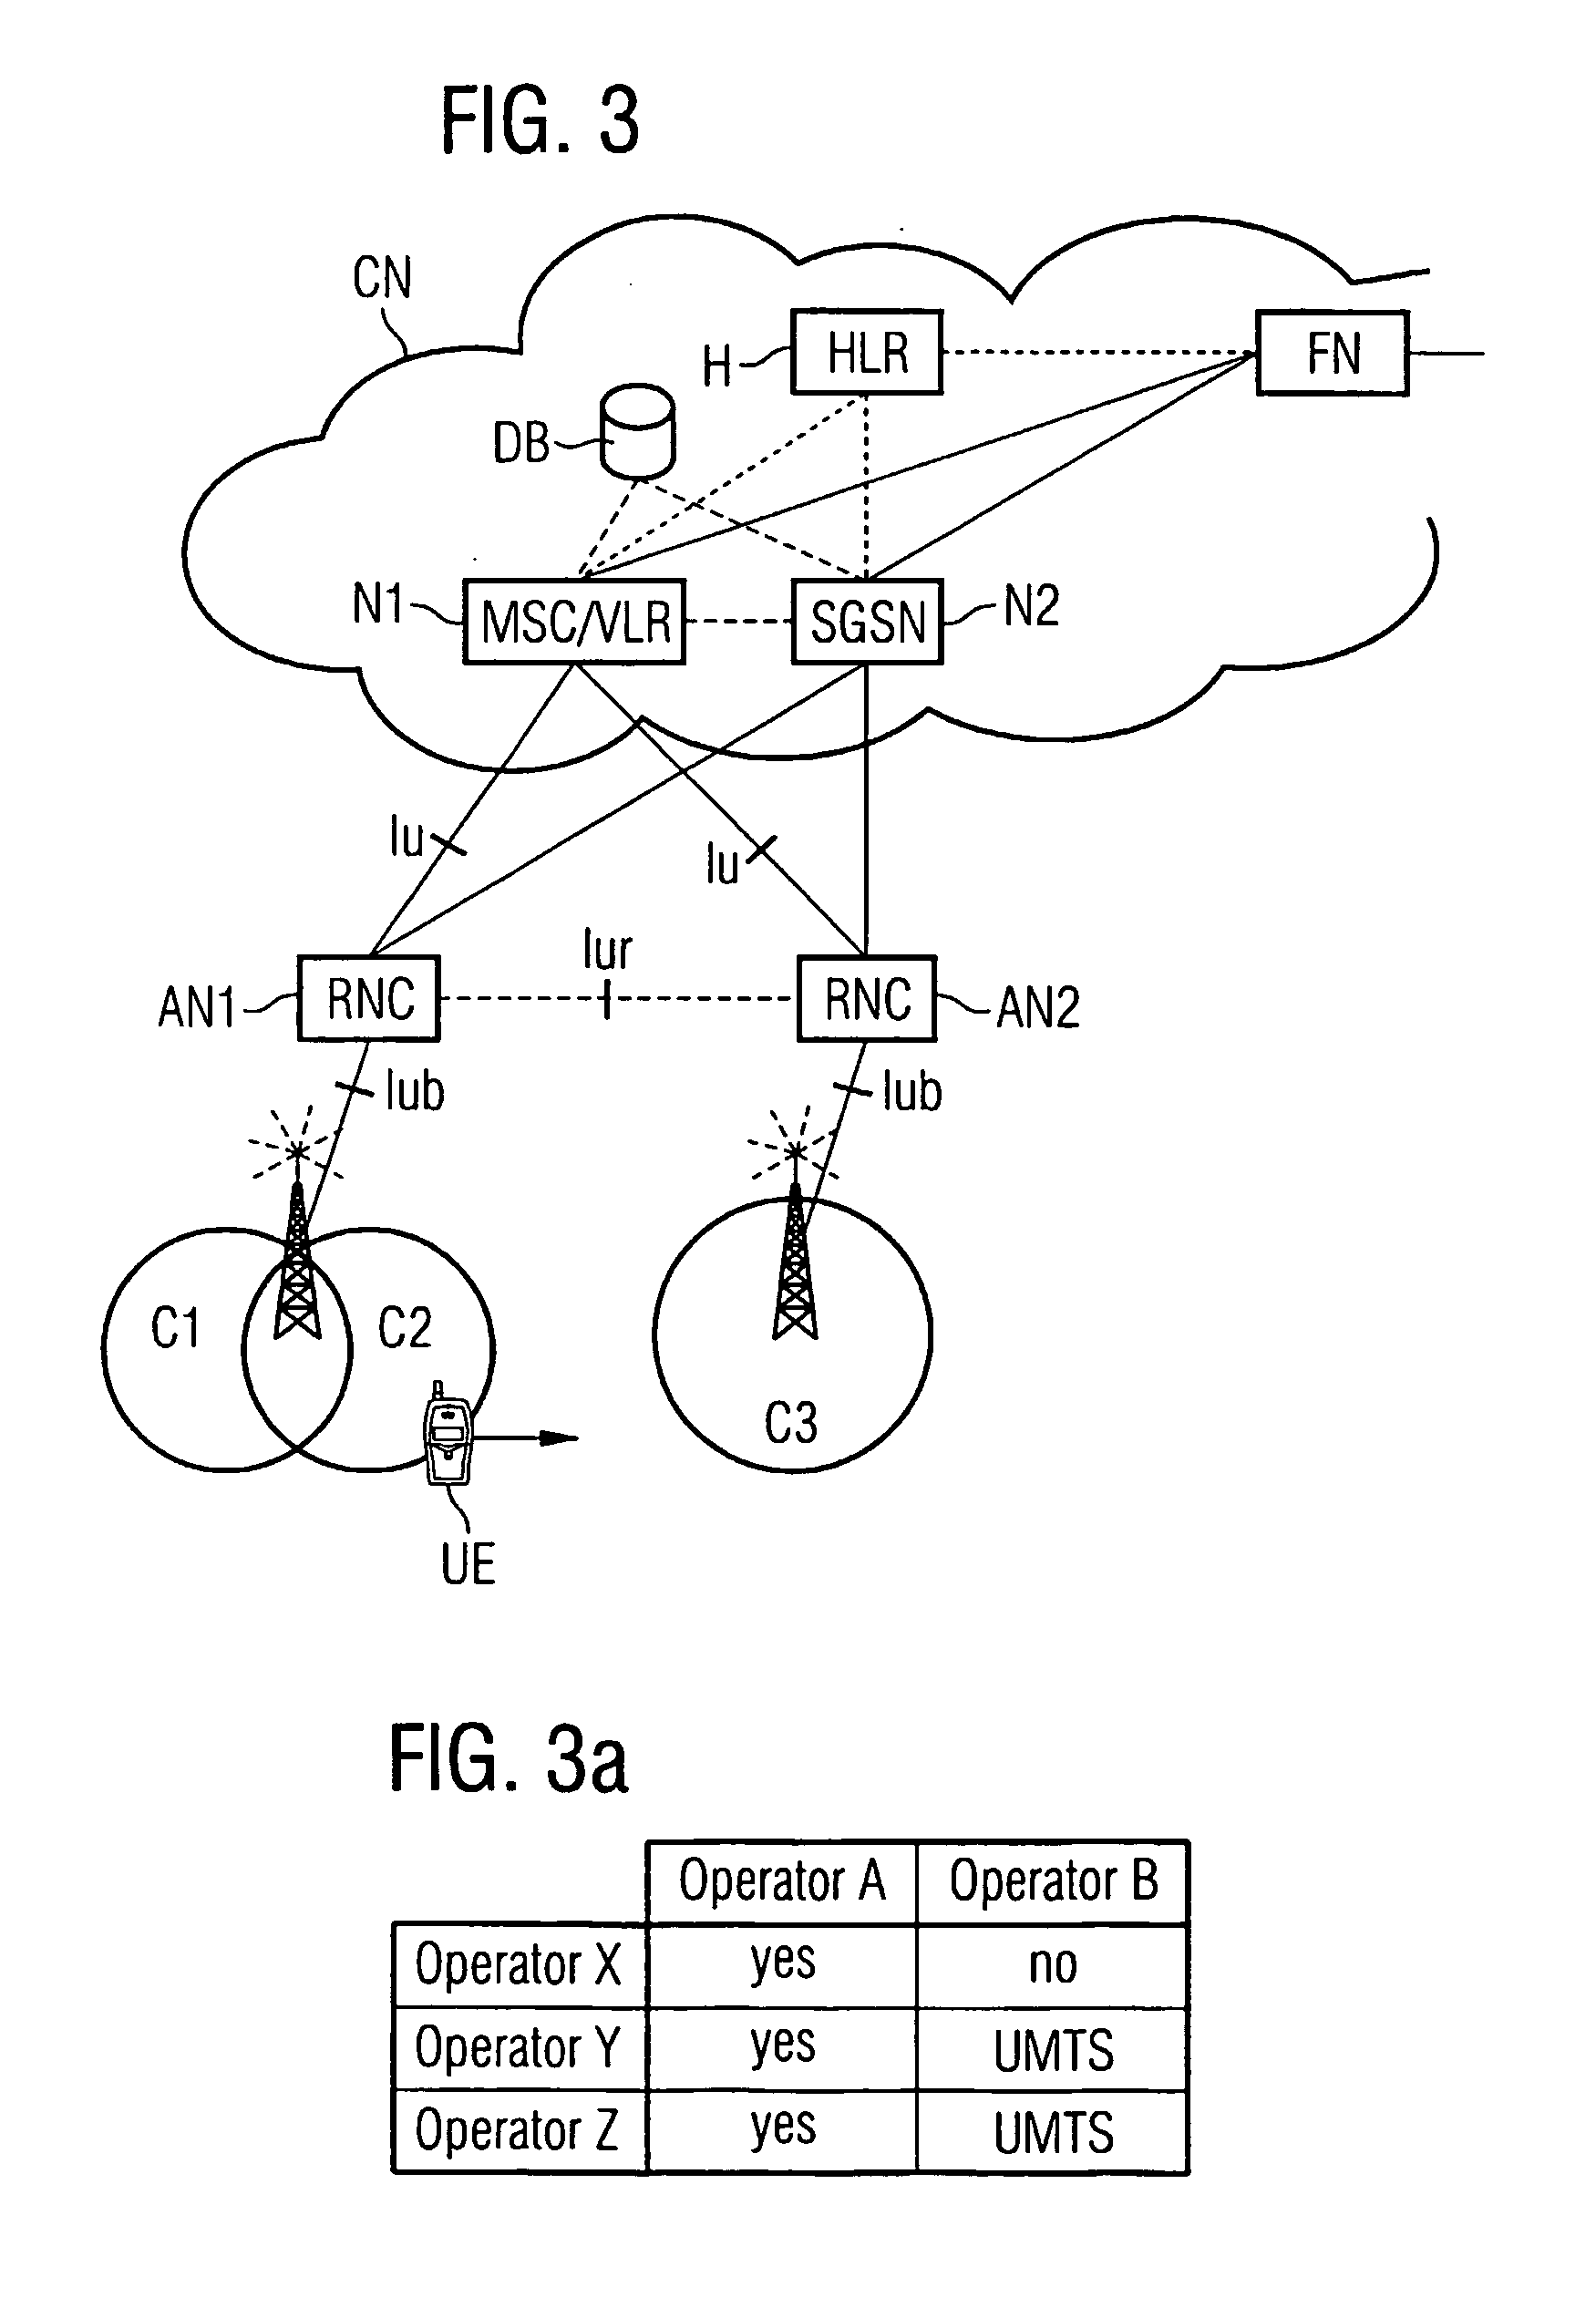 Method for determining whether to grant access of a user equipment to a radio access network